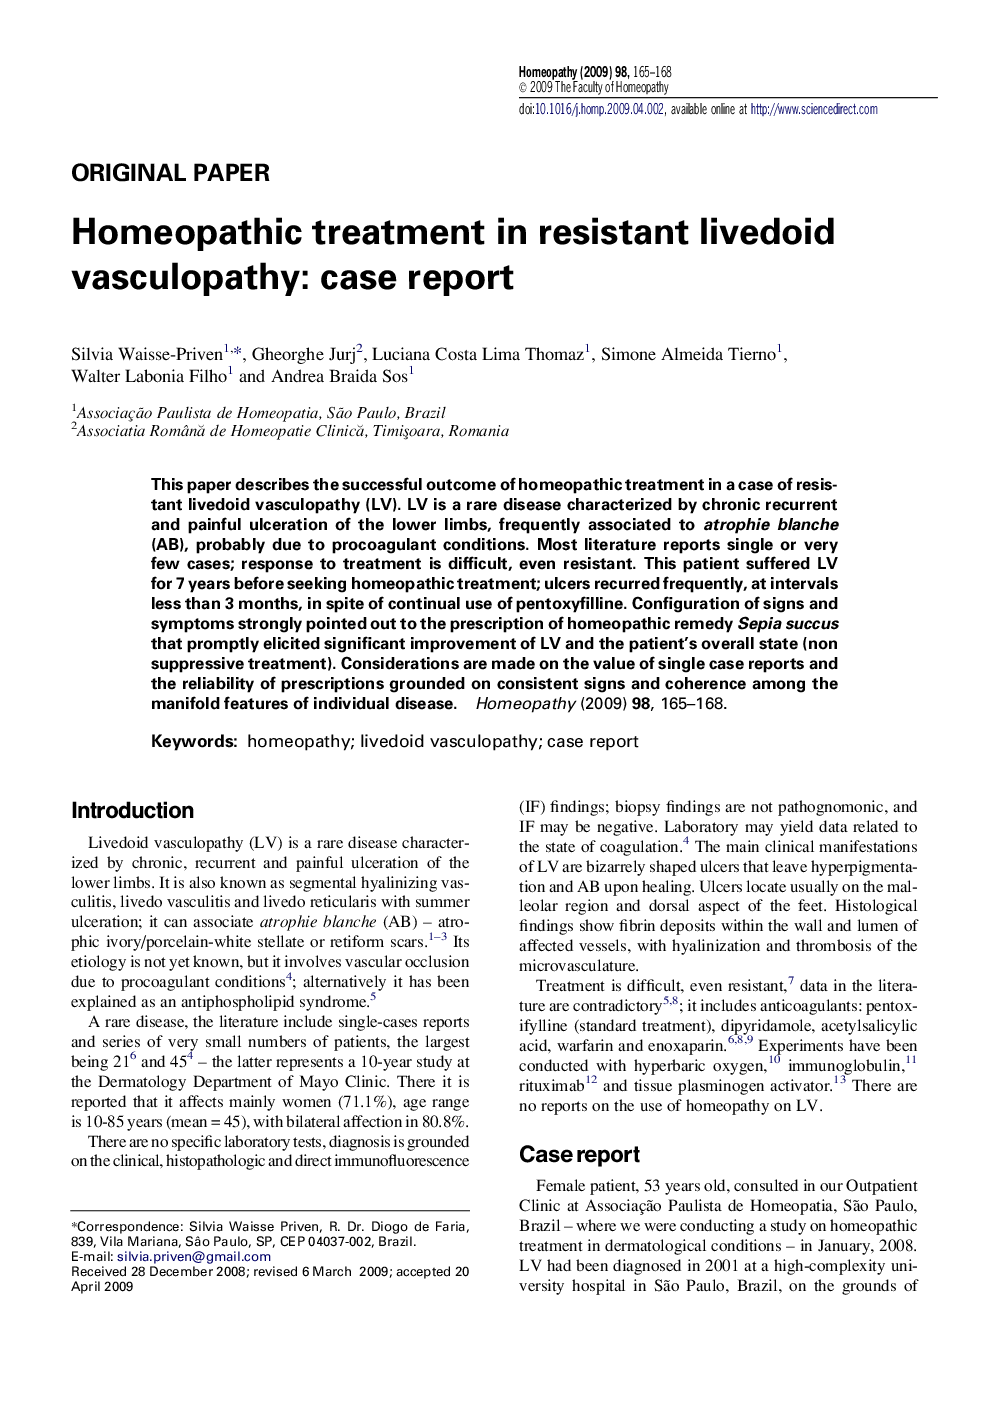 Homeopathic treatment in resistant livedoid vasculopathy: case report